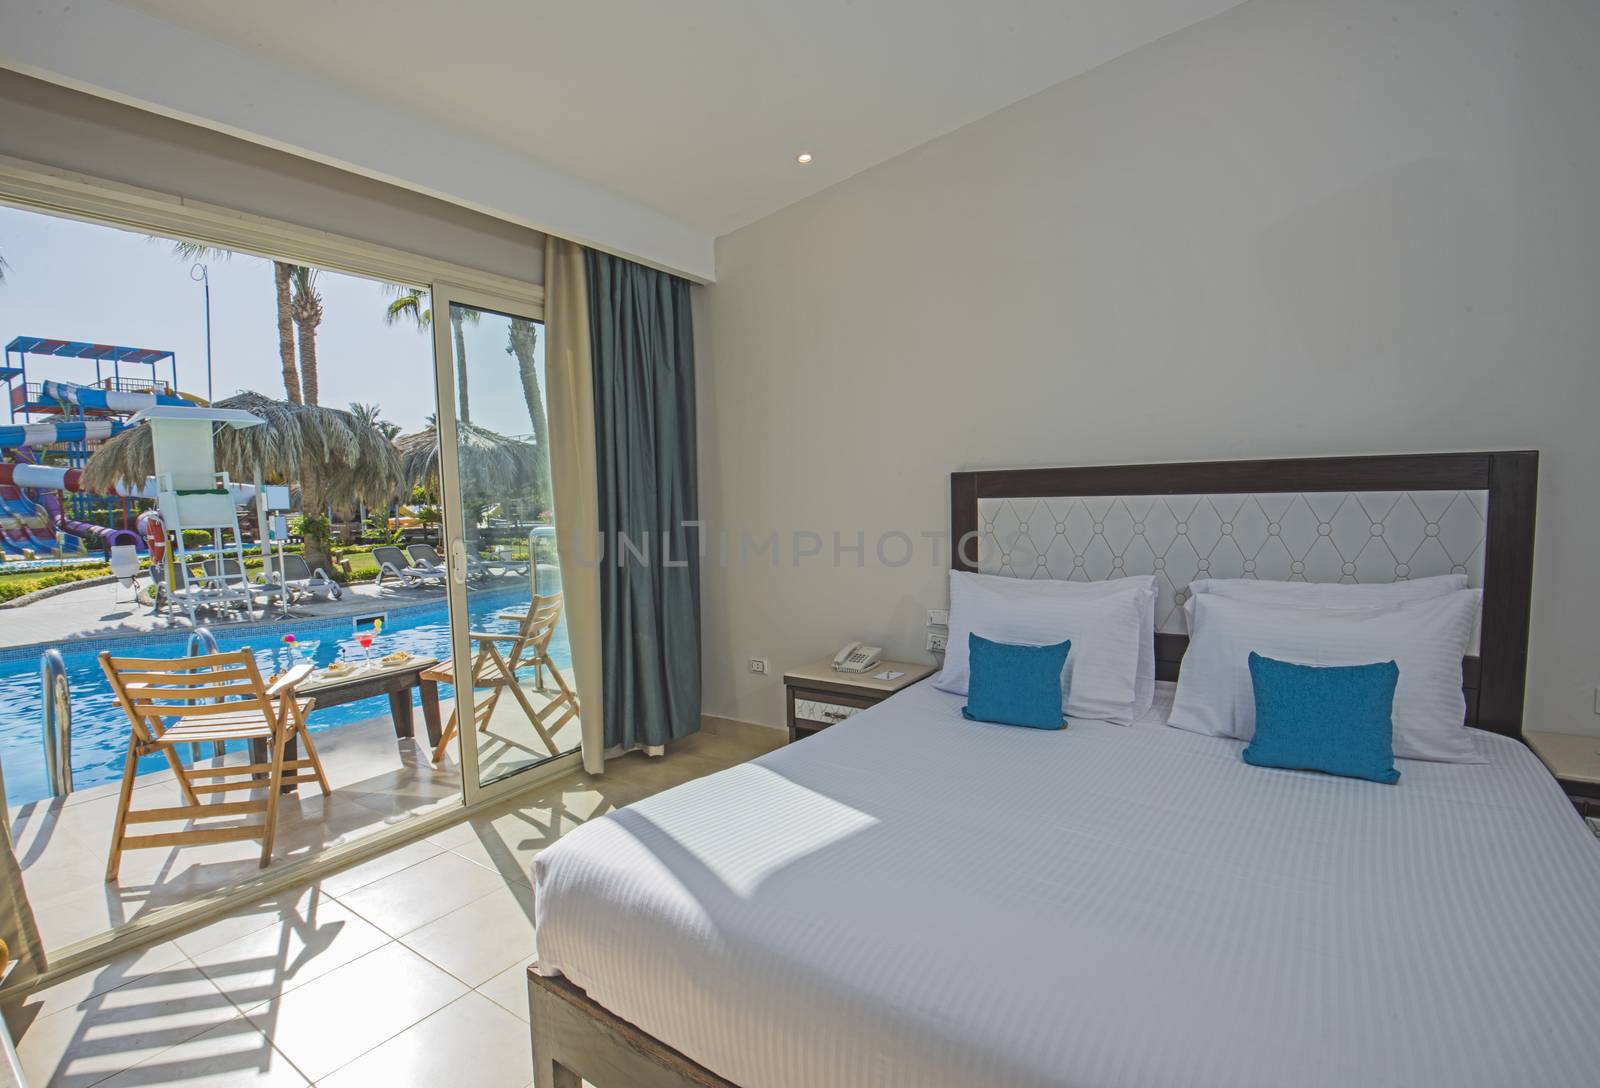 Double bed in suite of a luxury hotel room with terrace and pool view